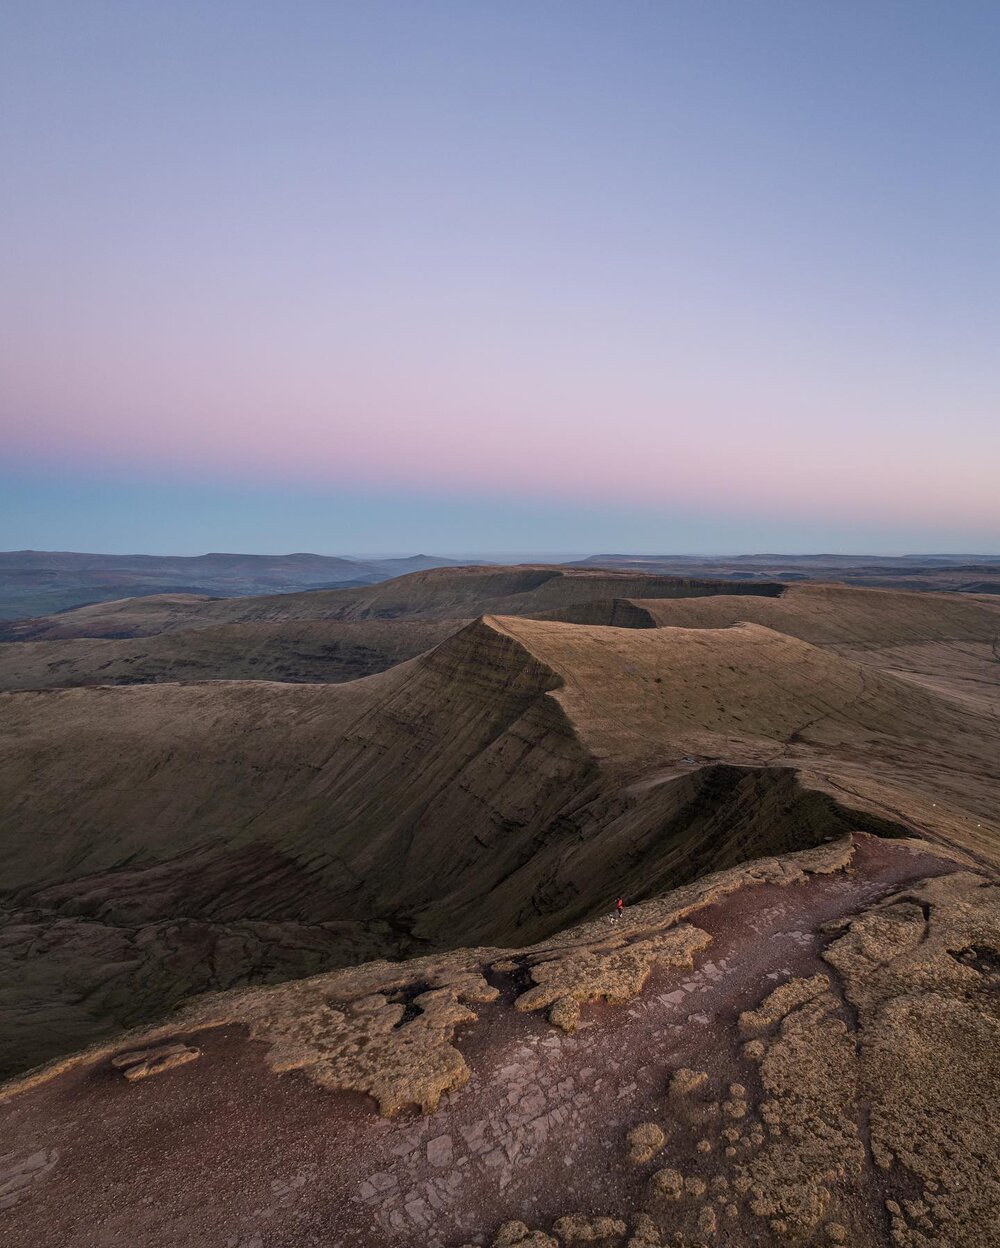 The best view in the Beacons? 

Blue hour on the summit of Pen-y-Fan. 

It&rsquo;s certainly up there, I&rsquo;d say it&rsquo;s easily in the top three views in the National Park alongside llyn-y-fan Fach and Henrhyd falls. 

What&rsquo;s your favour